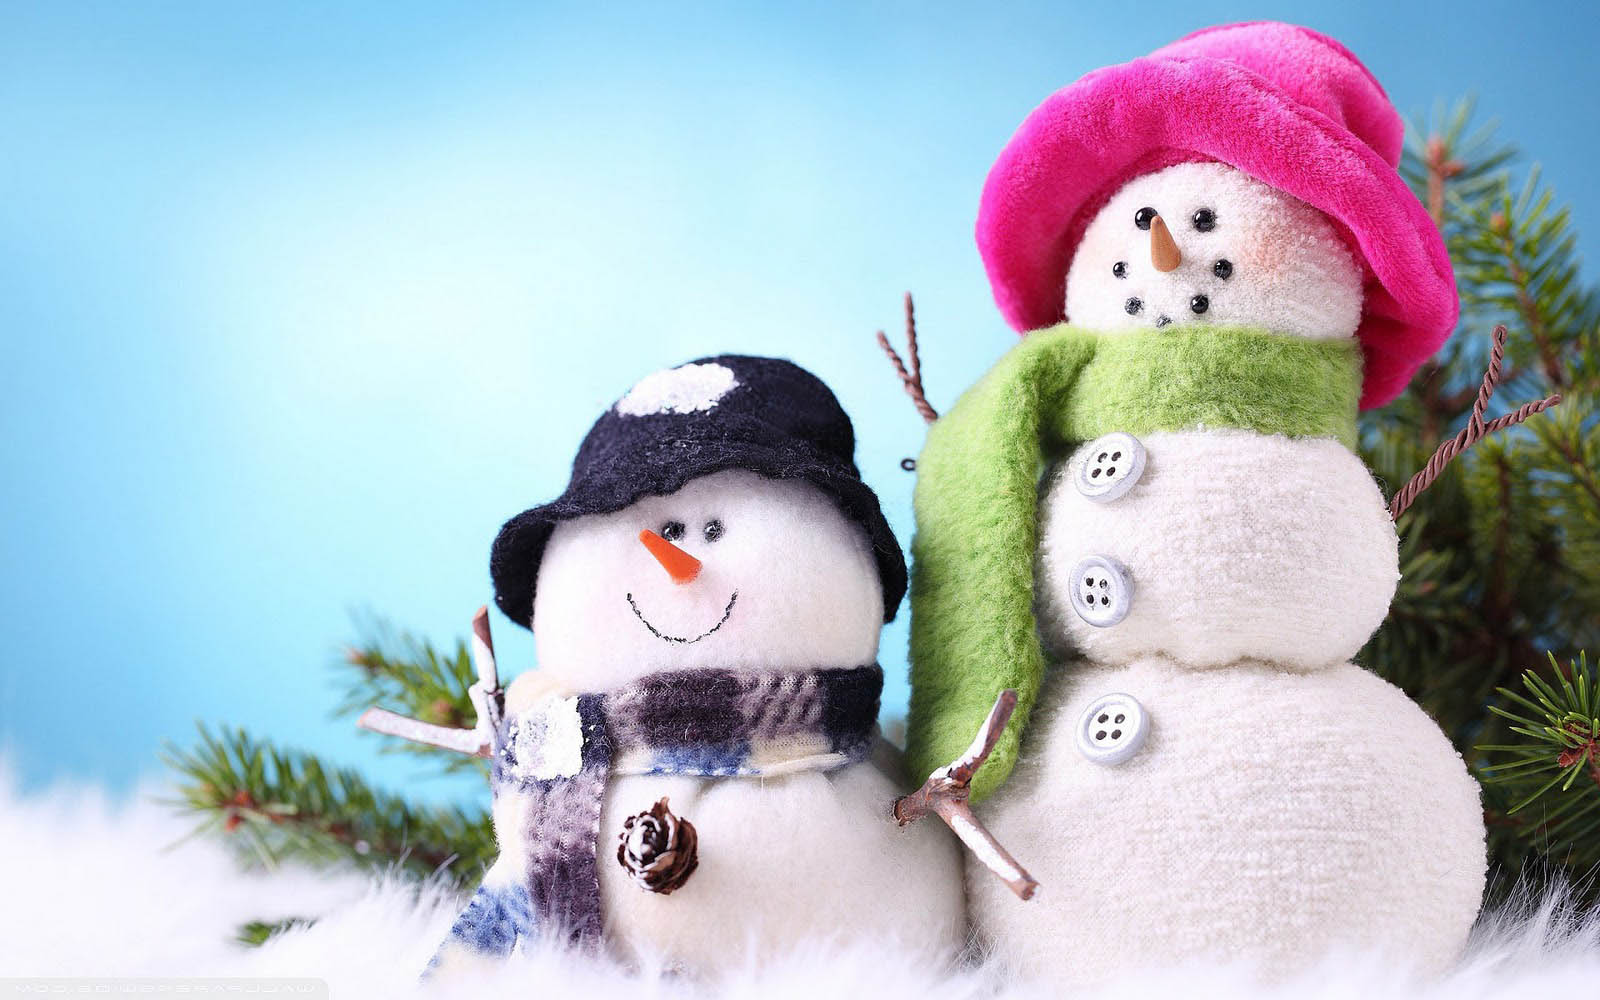 Snowman Wallpaper Background Photos Pictures And Image For